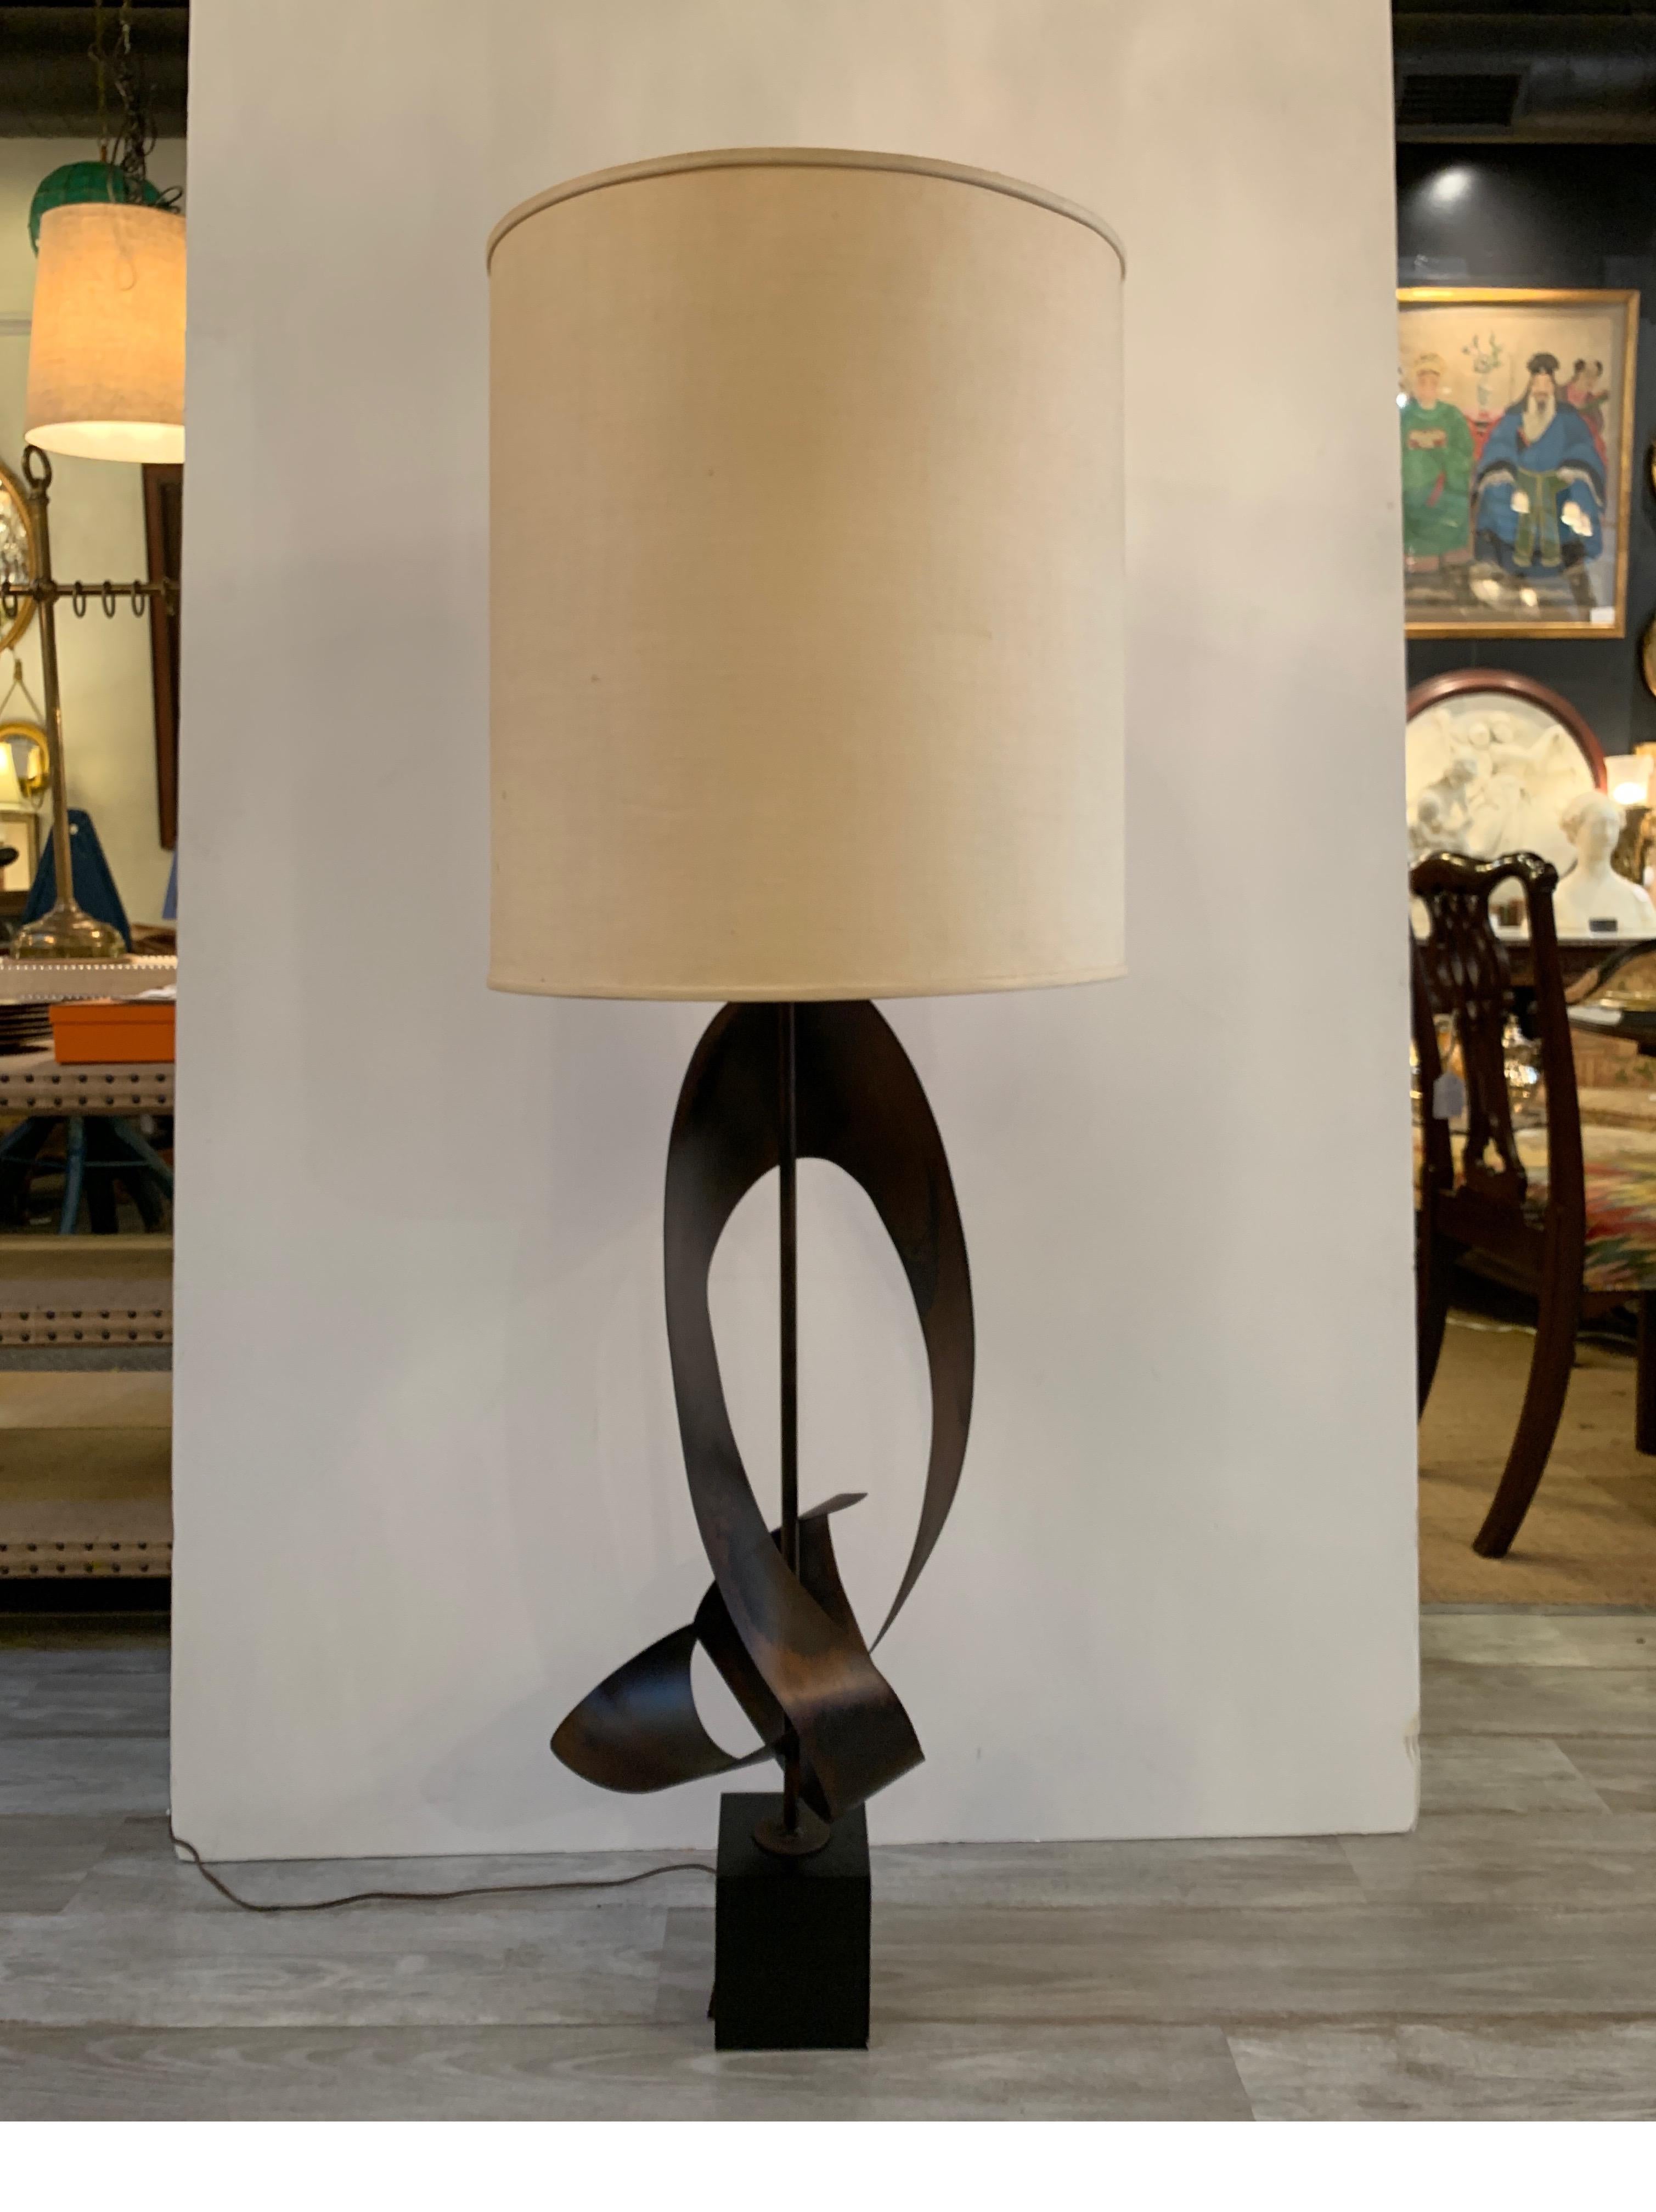 Artistic metal sculptural ribbon lamp designed by Harry Balmer. The weathered oiled finish with lamp with a black cube base. The shade is for photographic purposes only and not included but easily added for the next owner. The lamp to the top of the